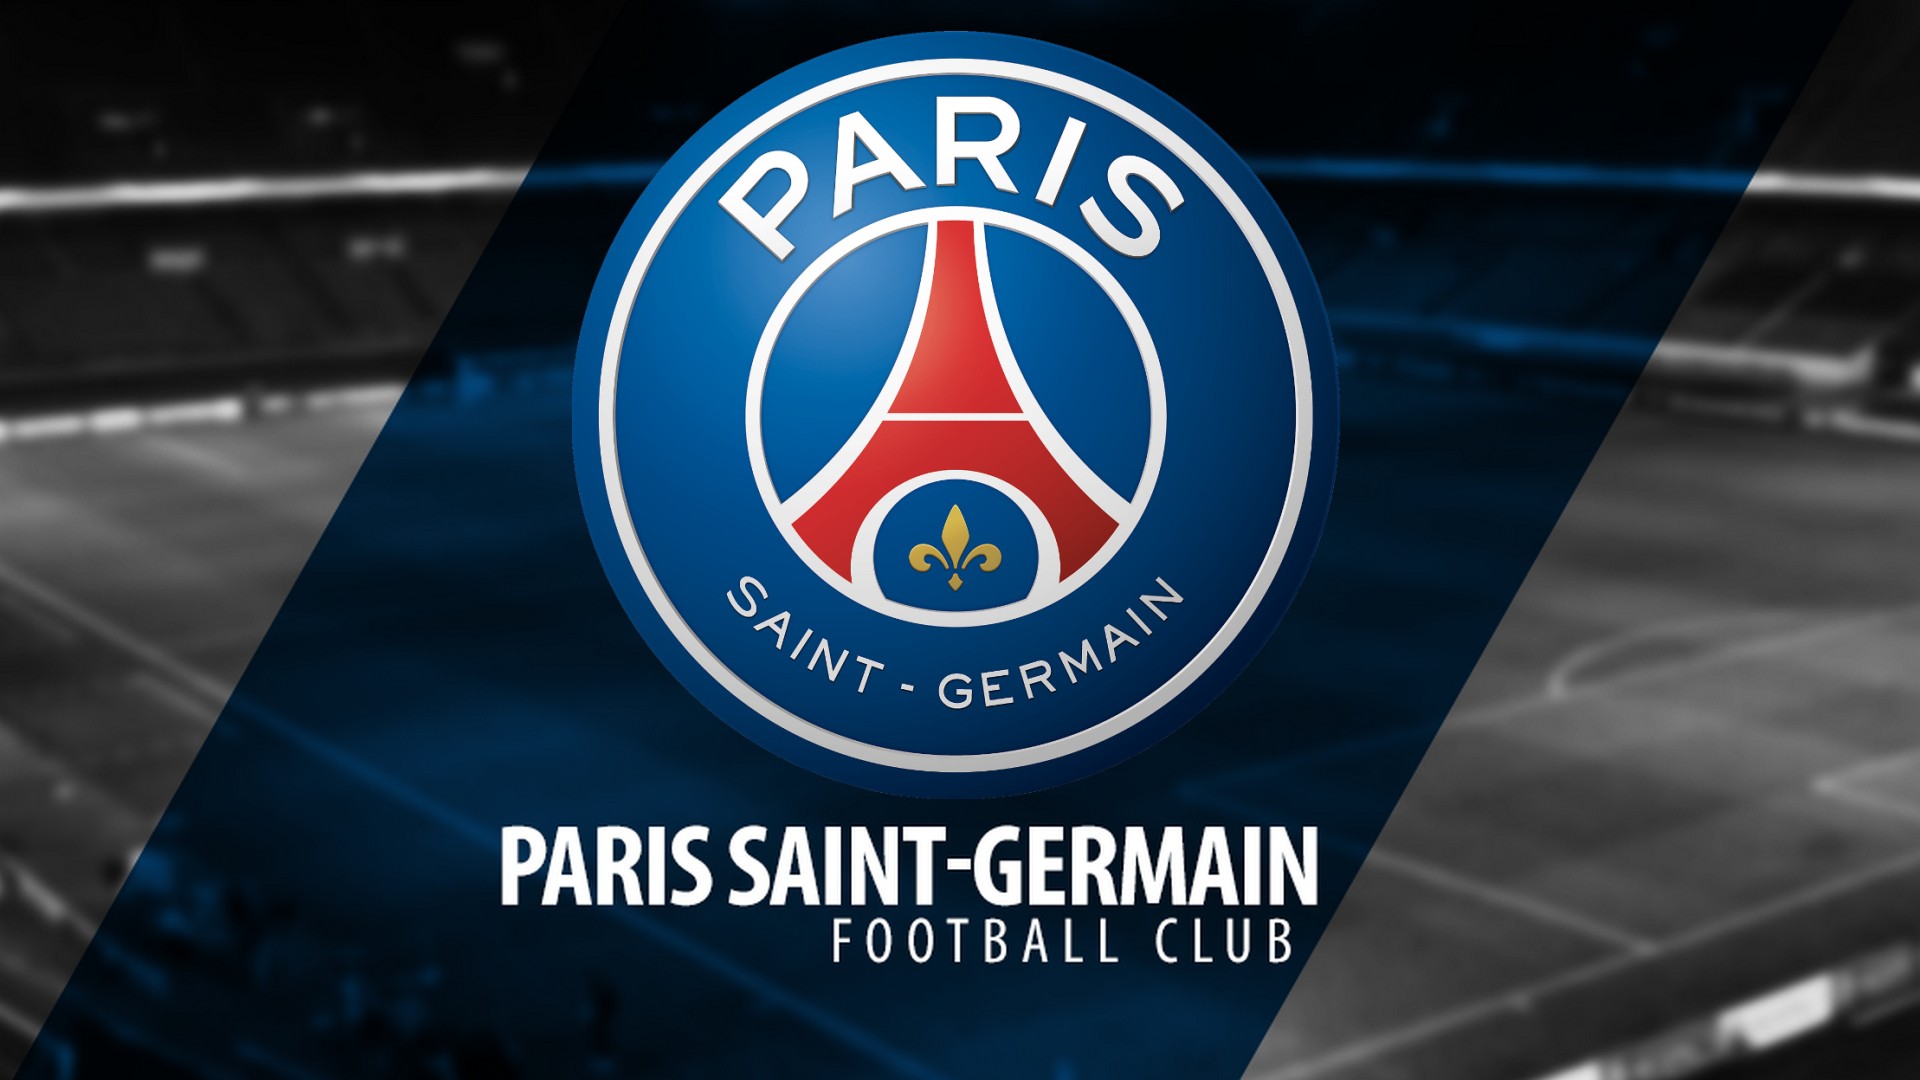 Paris Saint-Germain Wallpaper HD with resolution 1920x1080 pixel. You can make this wallpaper for your Mac or Windows Desktop Background, iPhone, Android or Tablet and another Smartphone device